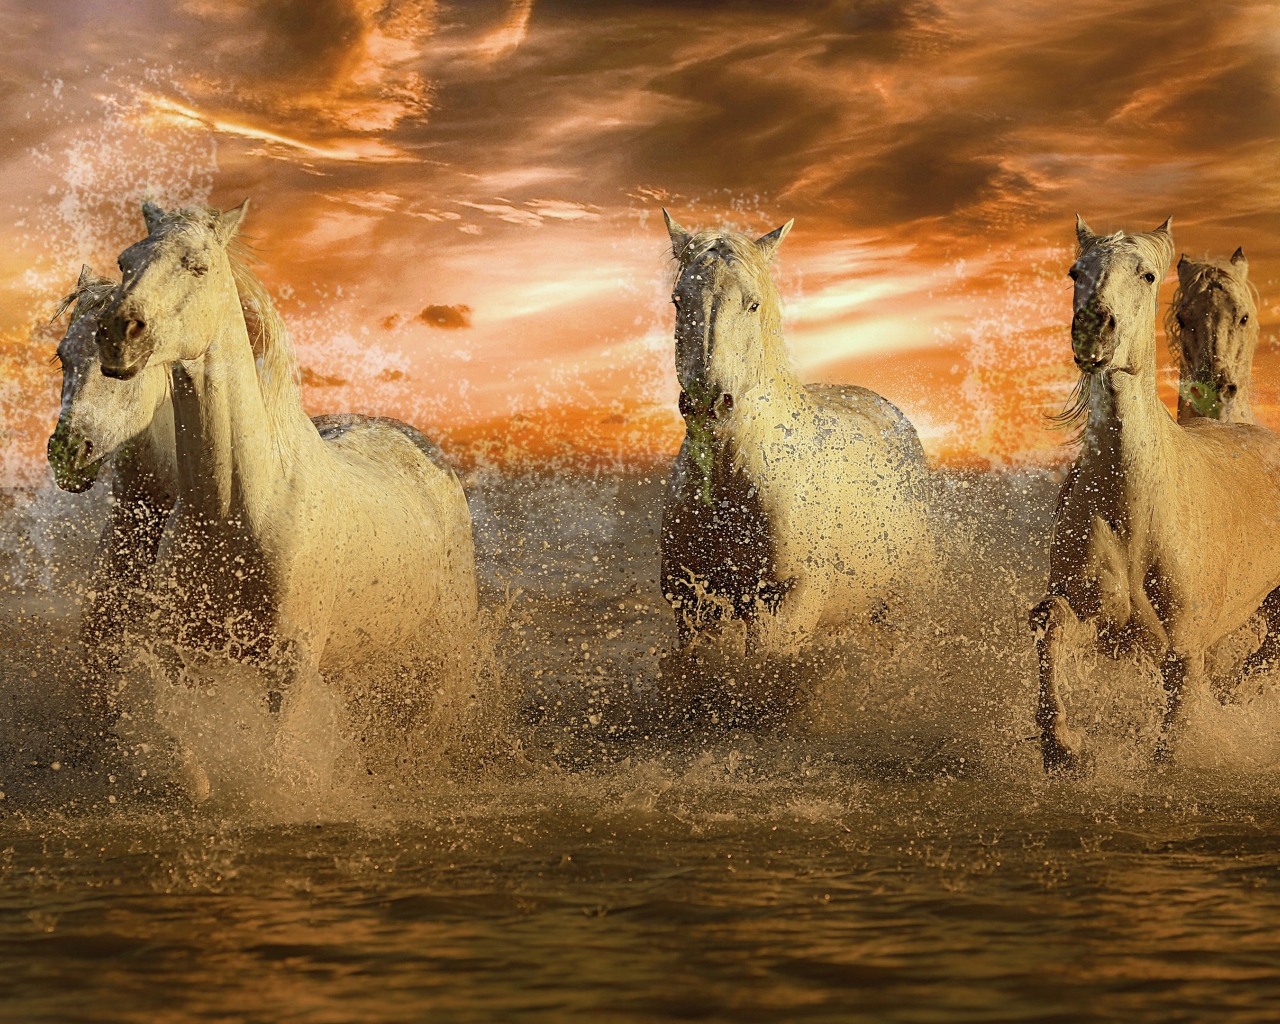 A flock of white horses rides through the water at sunset